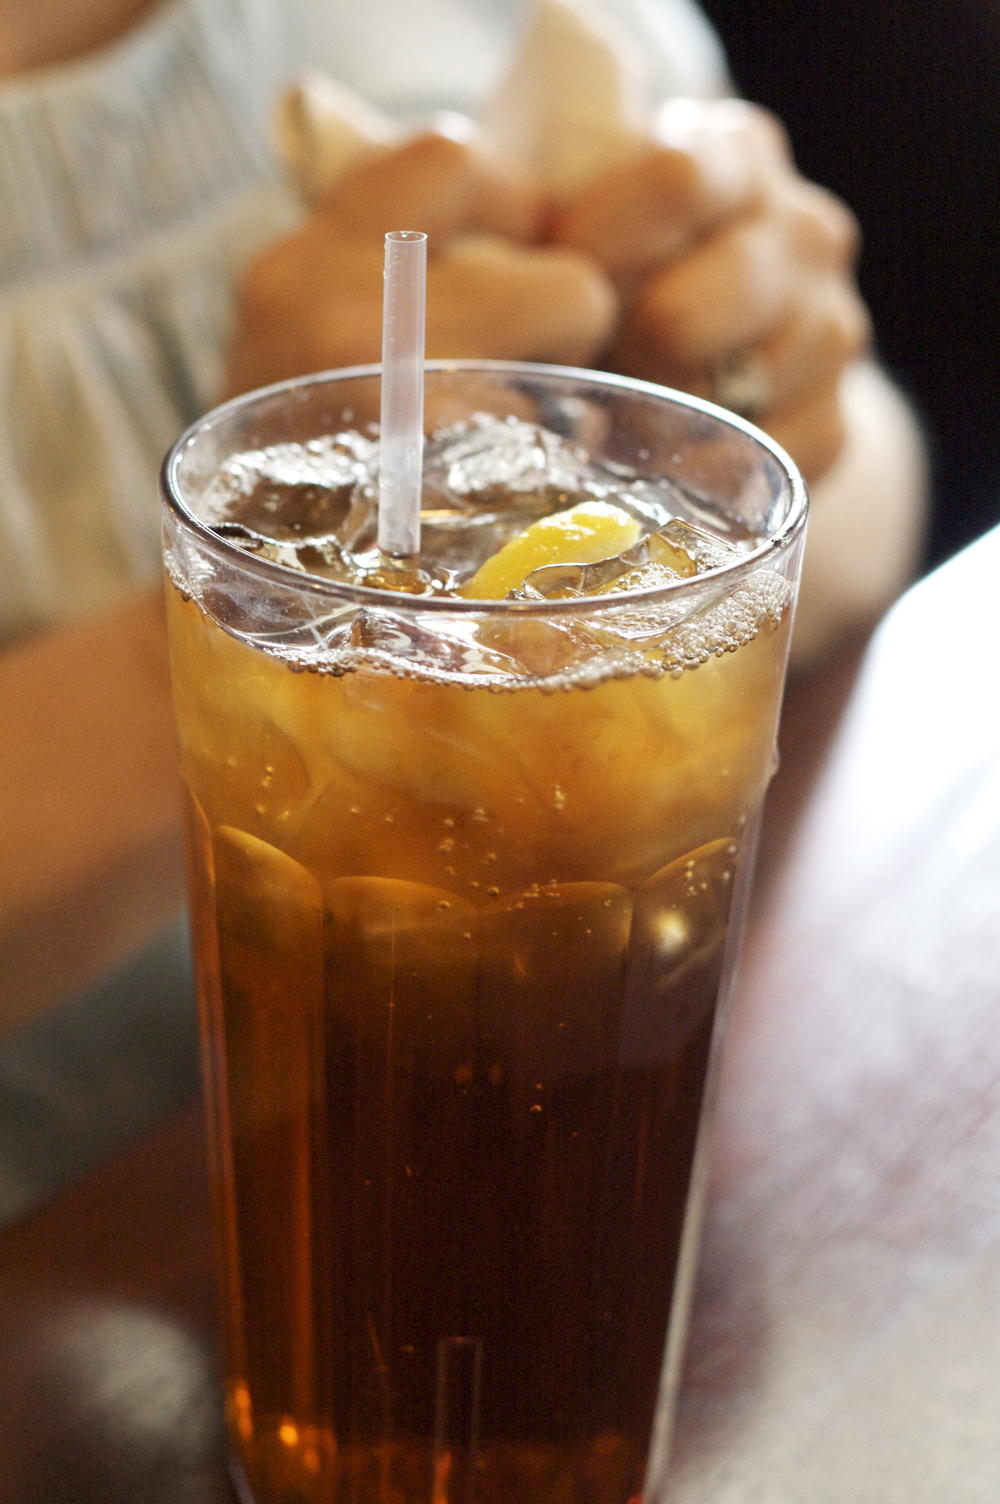 Sweet Tea: A History Of The 'Nectar Of The South